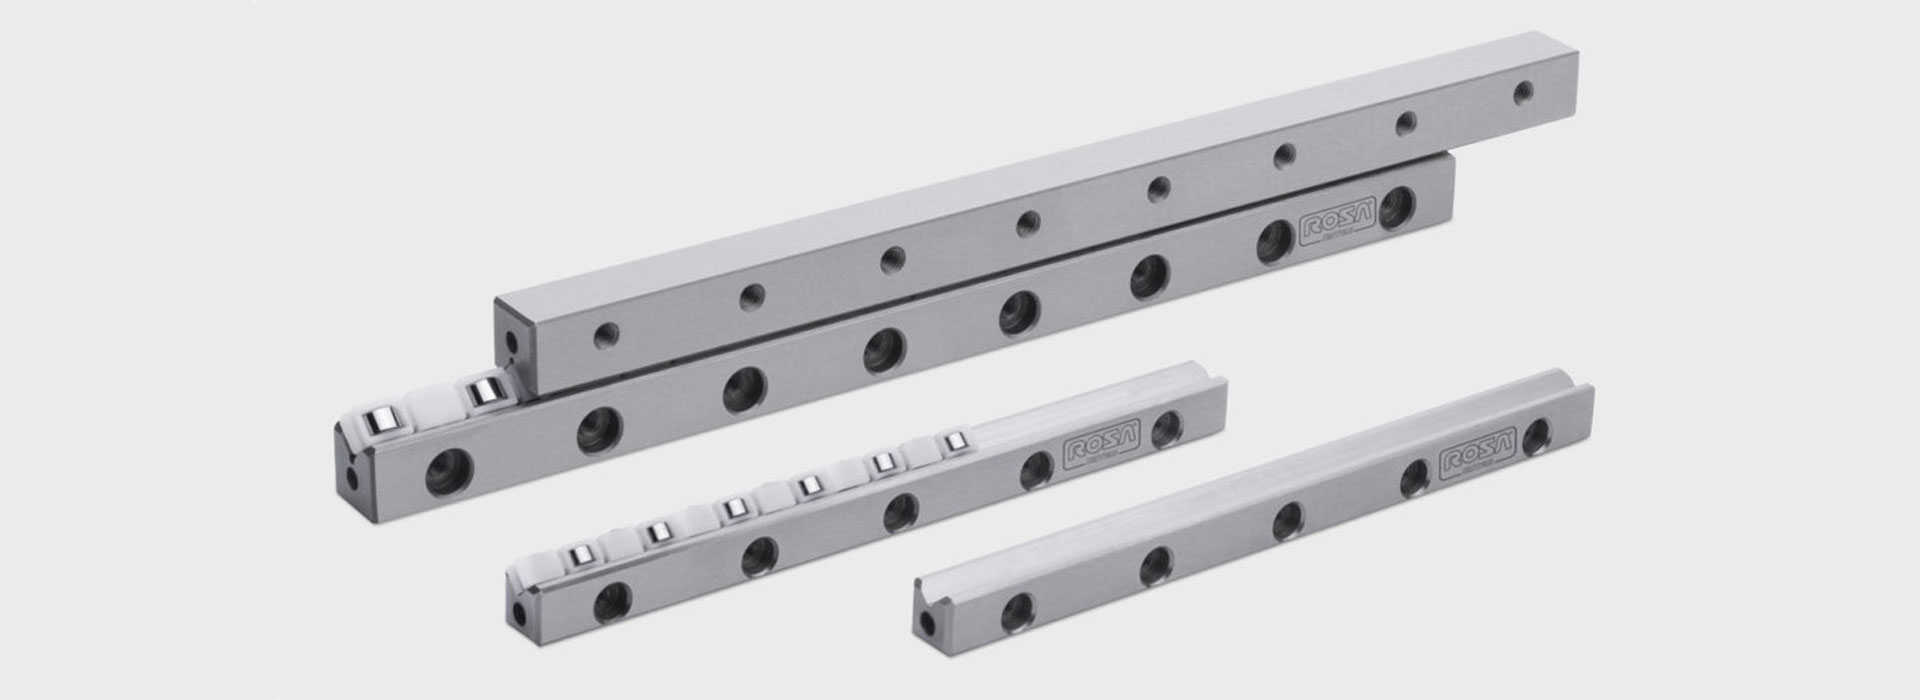 Timken Expands Linear Motion Offerings with Rosa Sistemi Acquisition